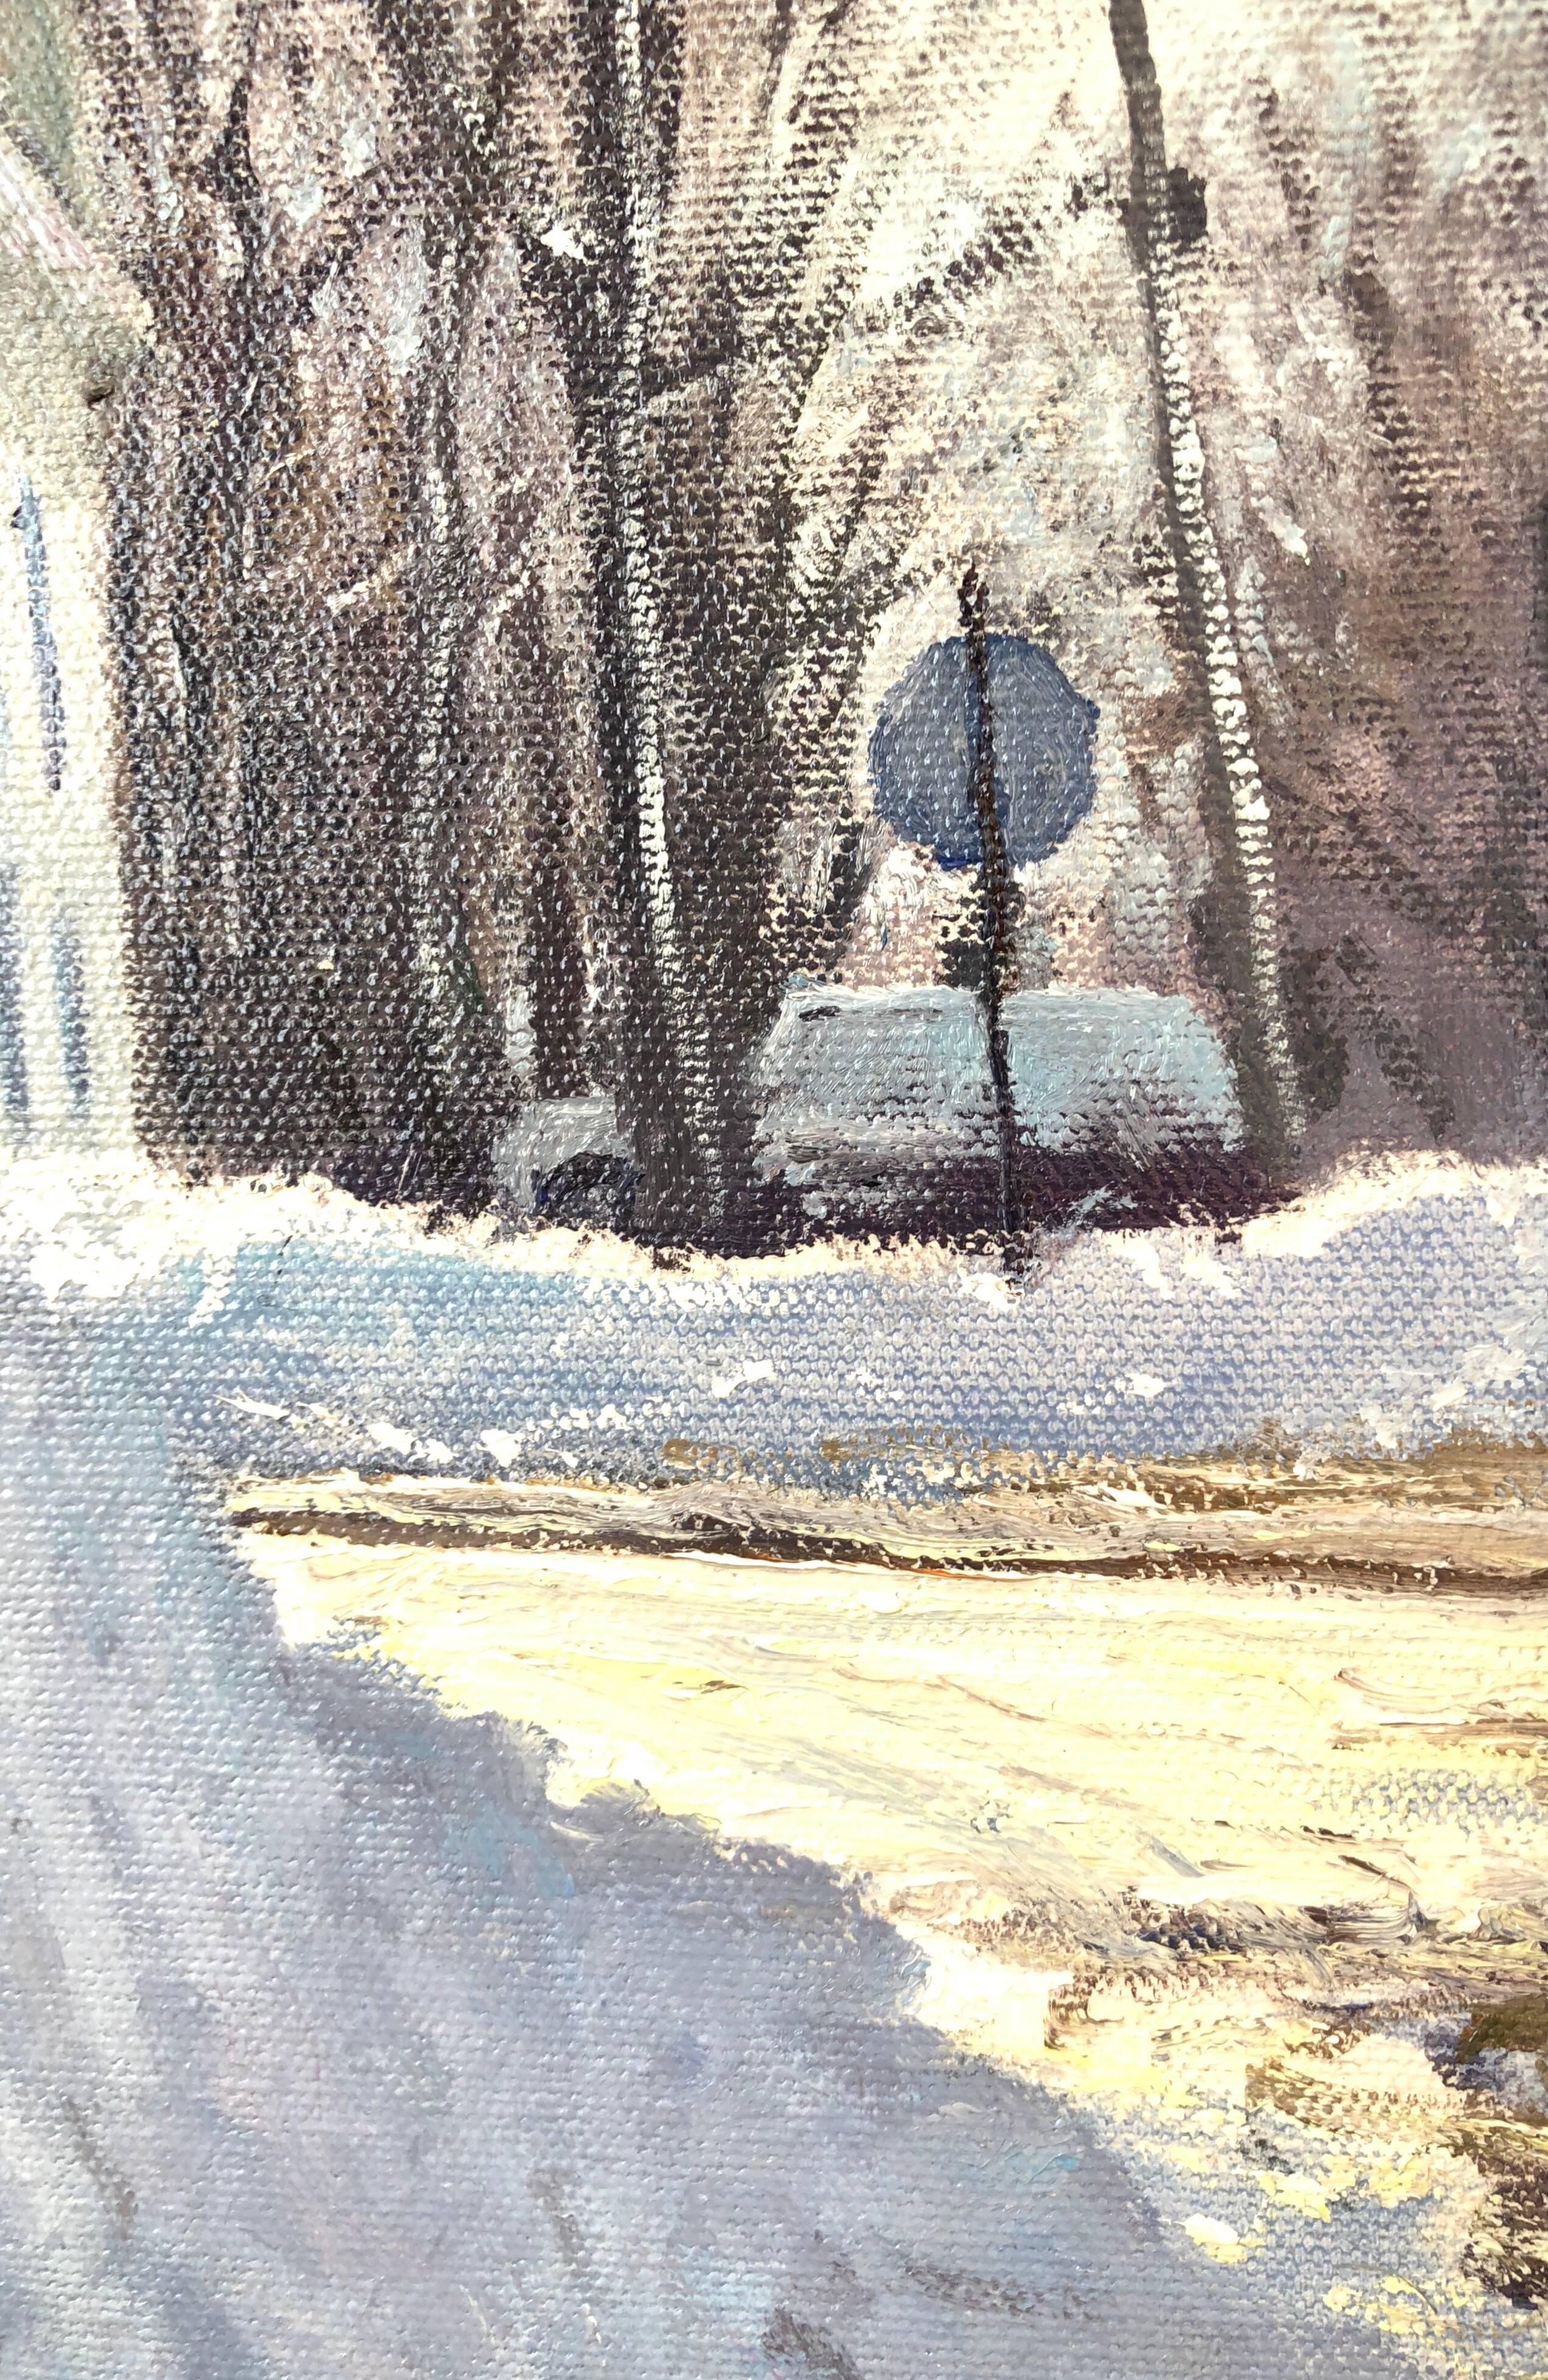 Lawrence Street, Winter - Brown Landscape Painting by Brian Kliewer